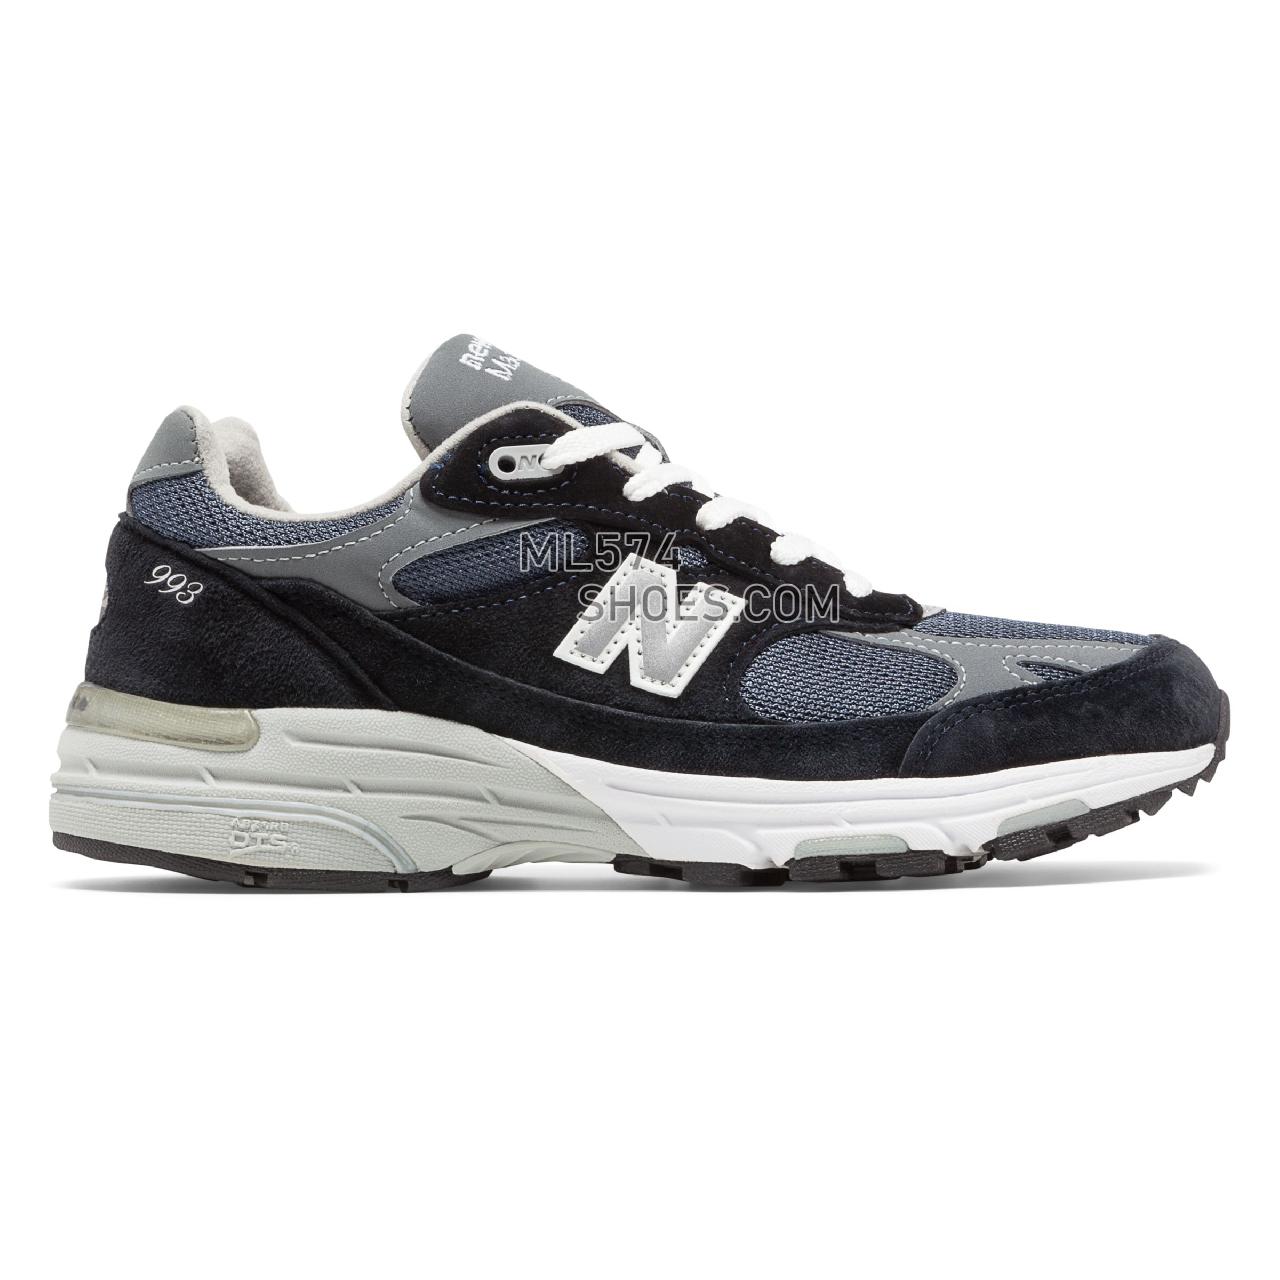 New Balance Made in US 993 - Women's Neutral Running - Natural Indigo with Grey - WR993NV